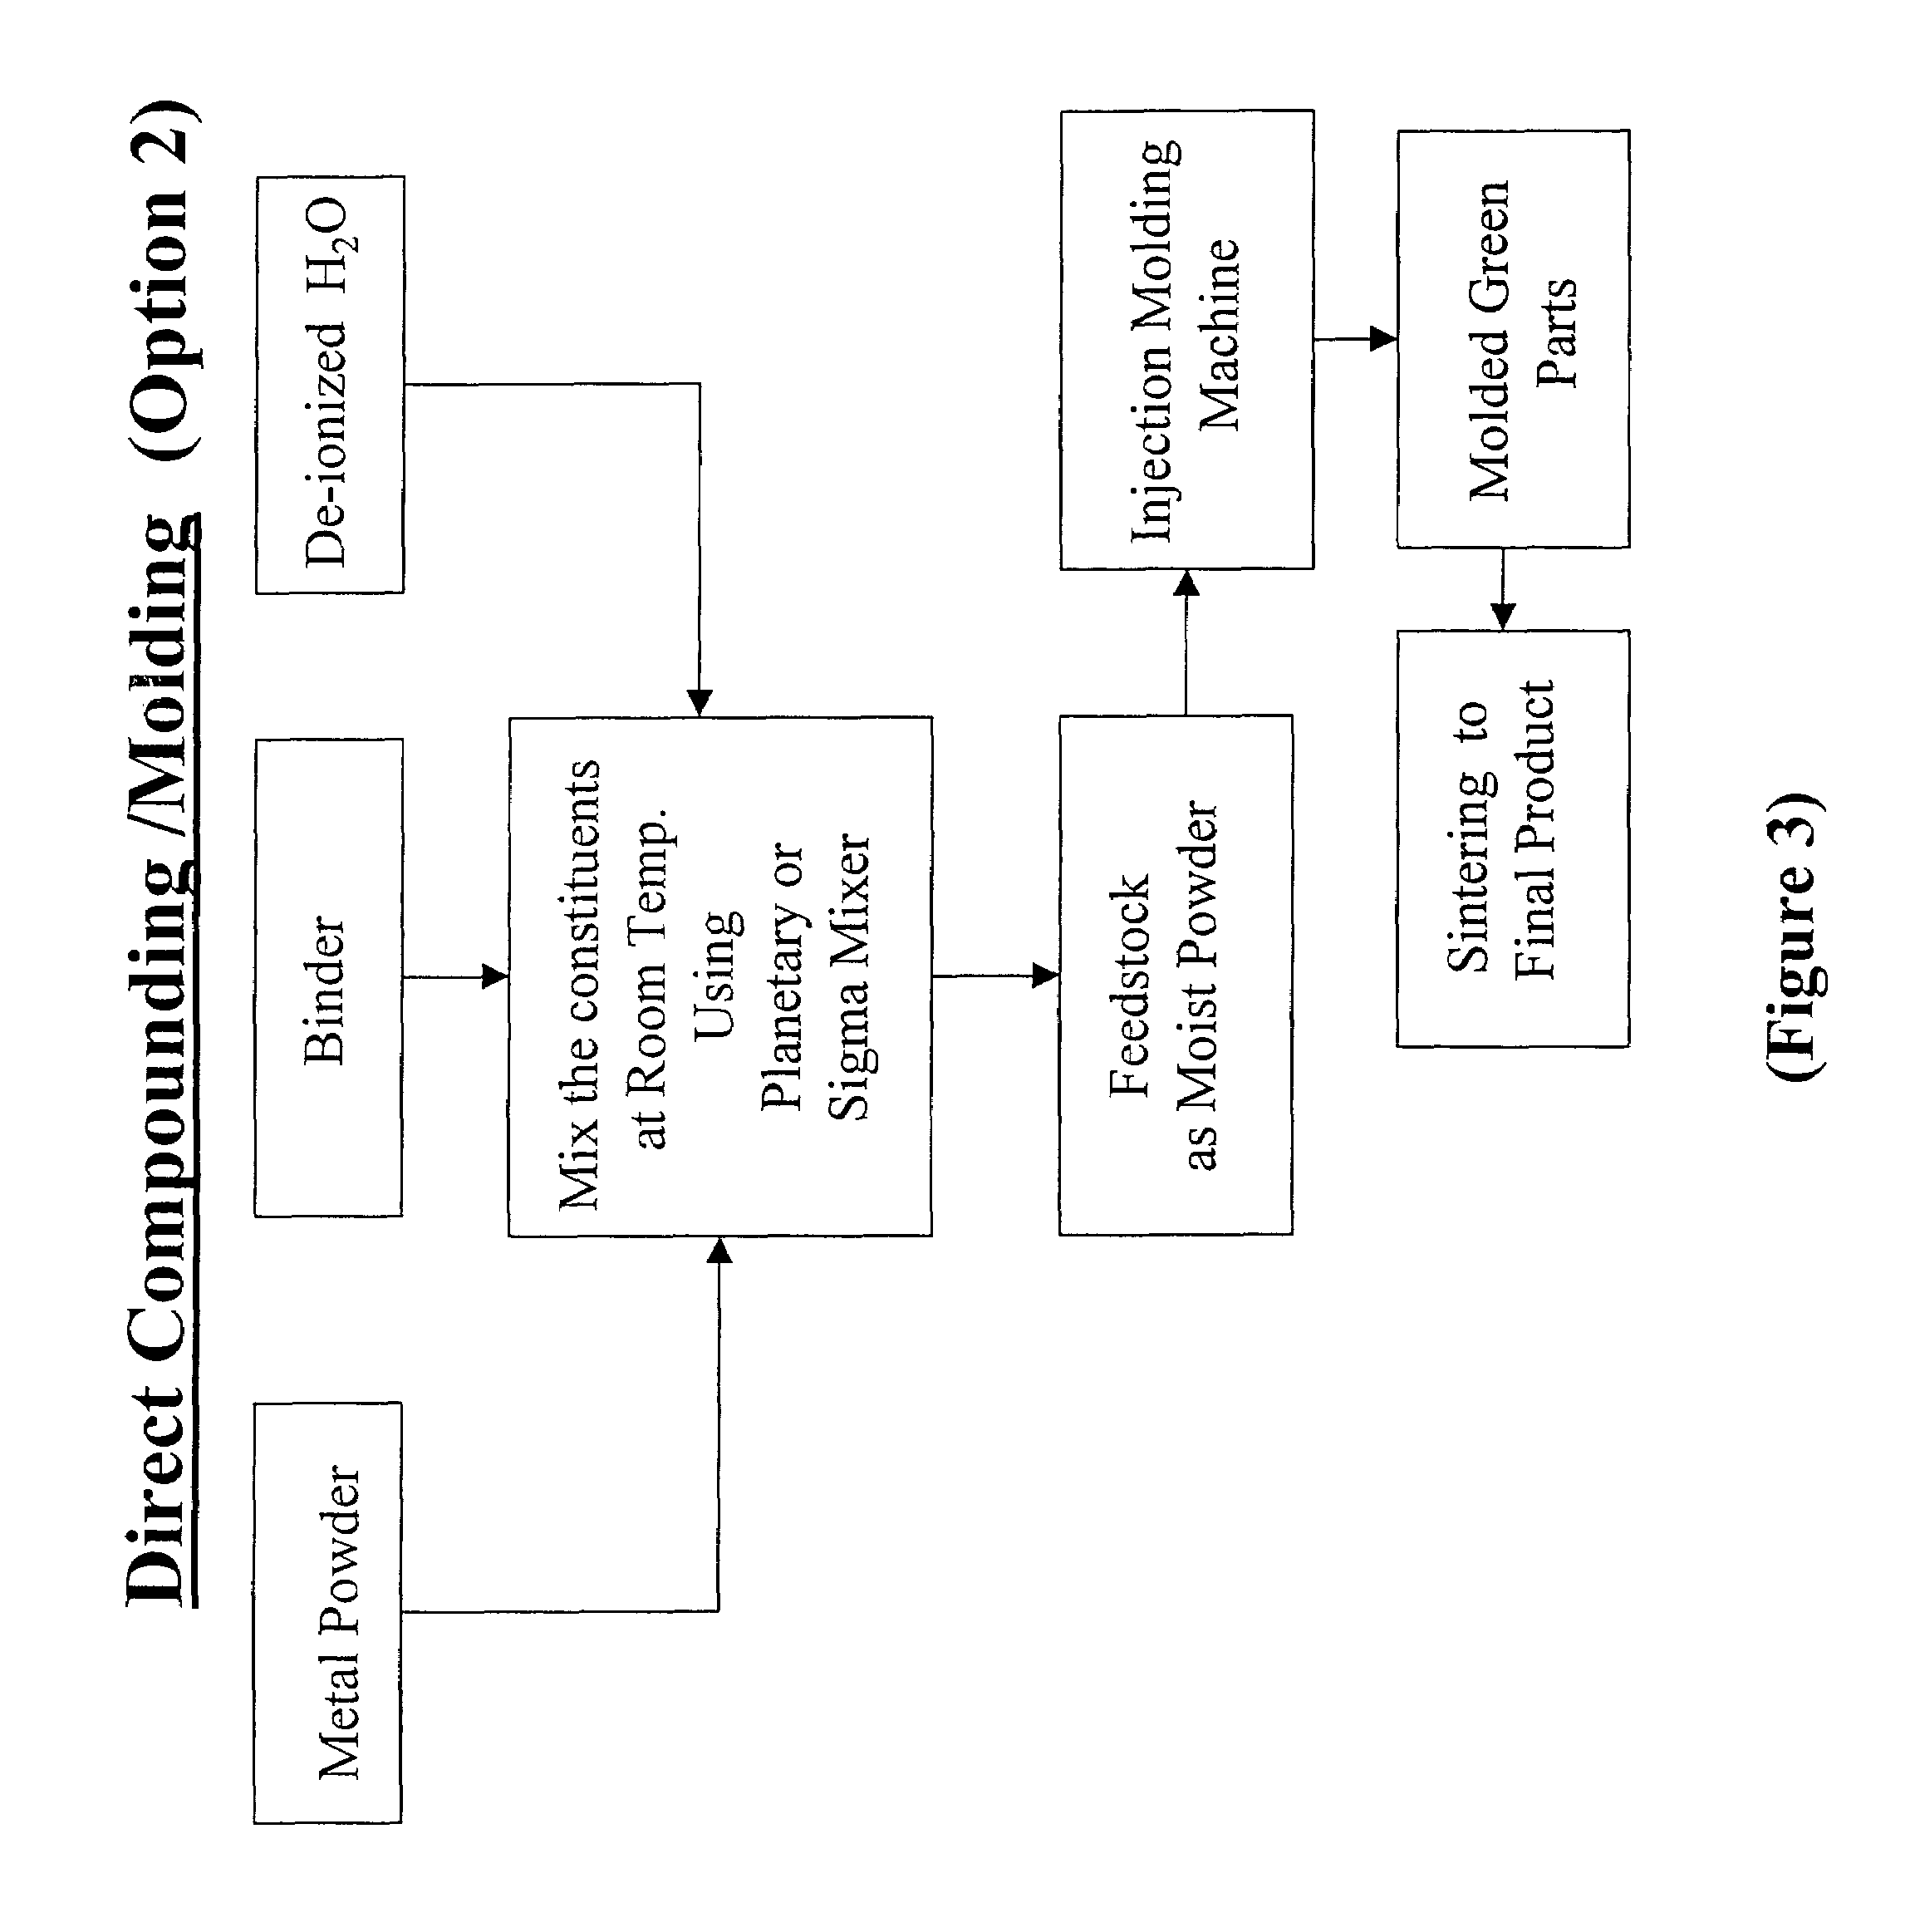 Aqueous binder formulation for metal and ceramic feedstock for injection molding and aqueous coating composition